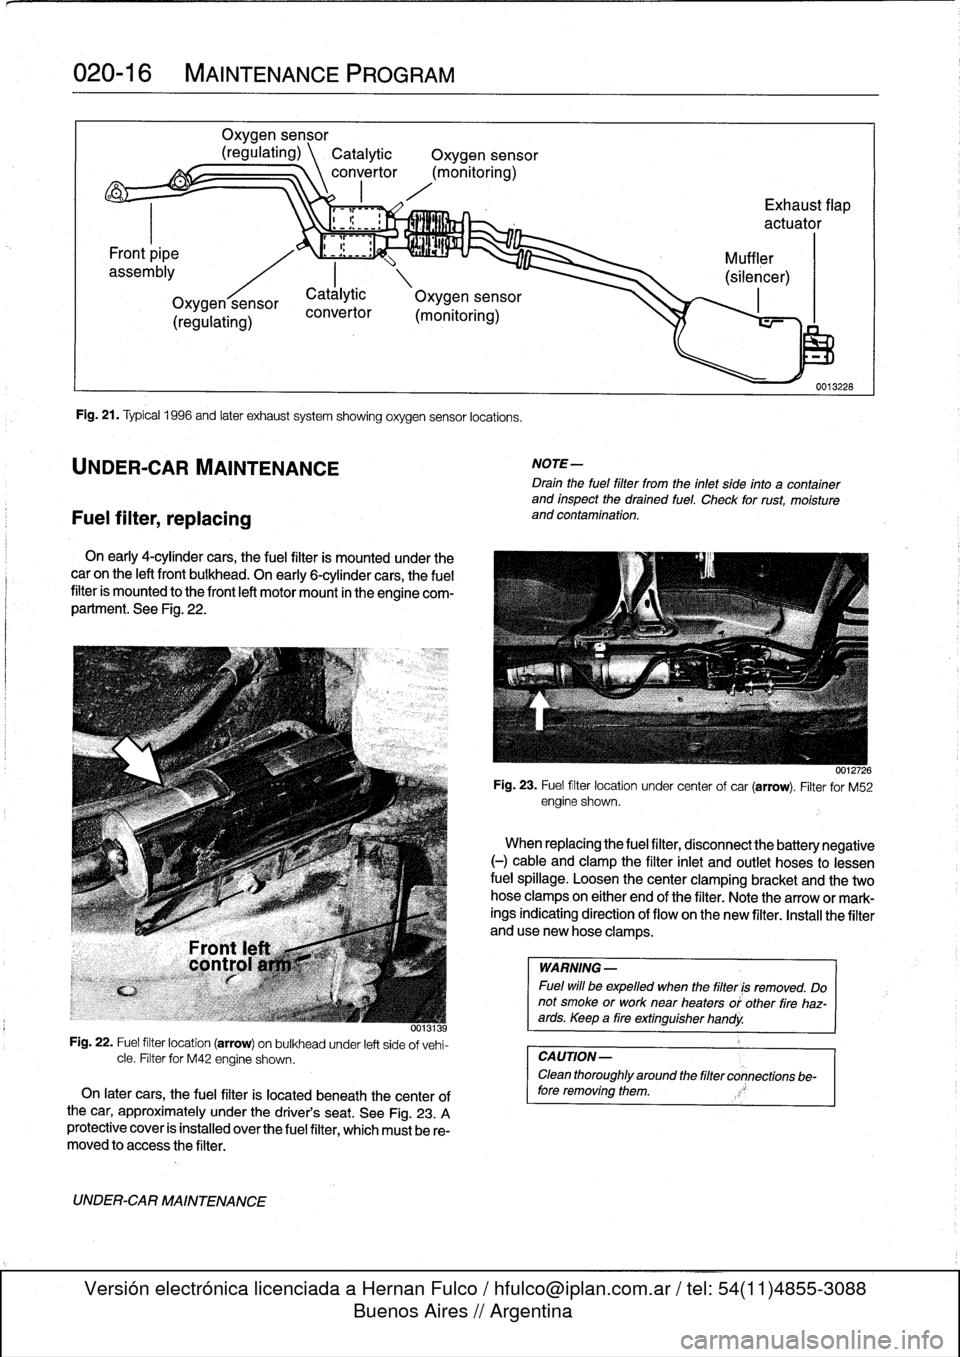 BMW 323i 1993 E36 Workshop Manual 
020-
1
6

	

MAINTENANCE
PROGRAM

Fuel
filter,
replacing

Oxygen
sensor

(regulating)
\
Catalytic

	

Oxygen
sensor
convertor
(monitoring)

Fig
.
21
.
Typical
1996
and
later
exhaust
system
showing
ox